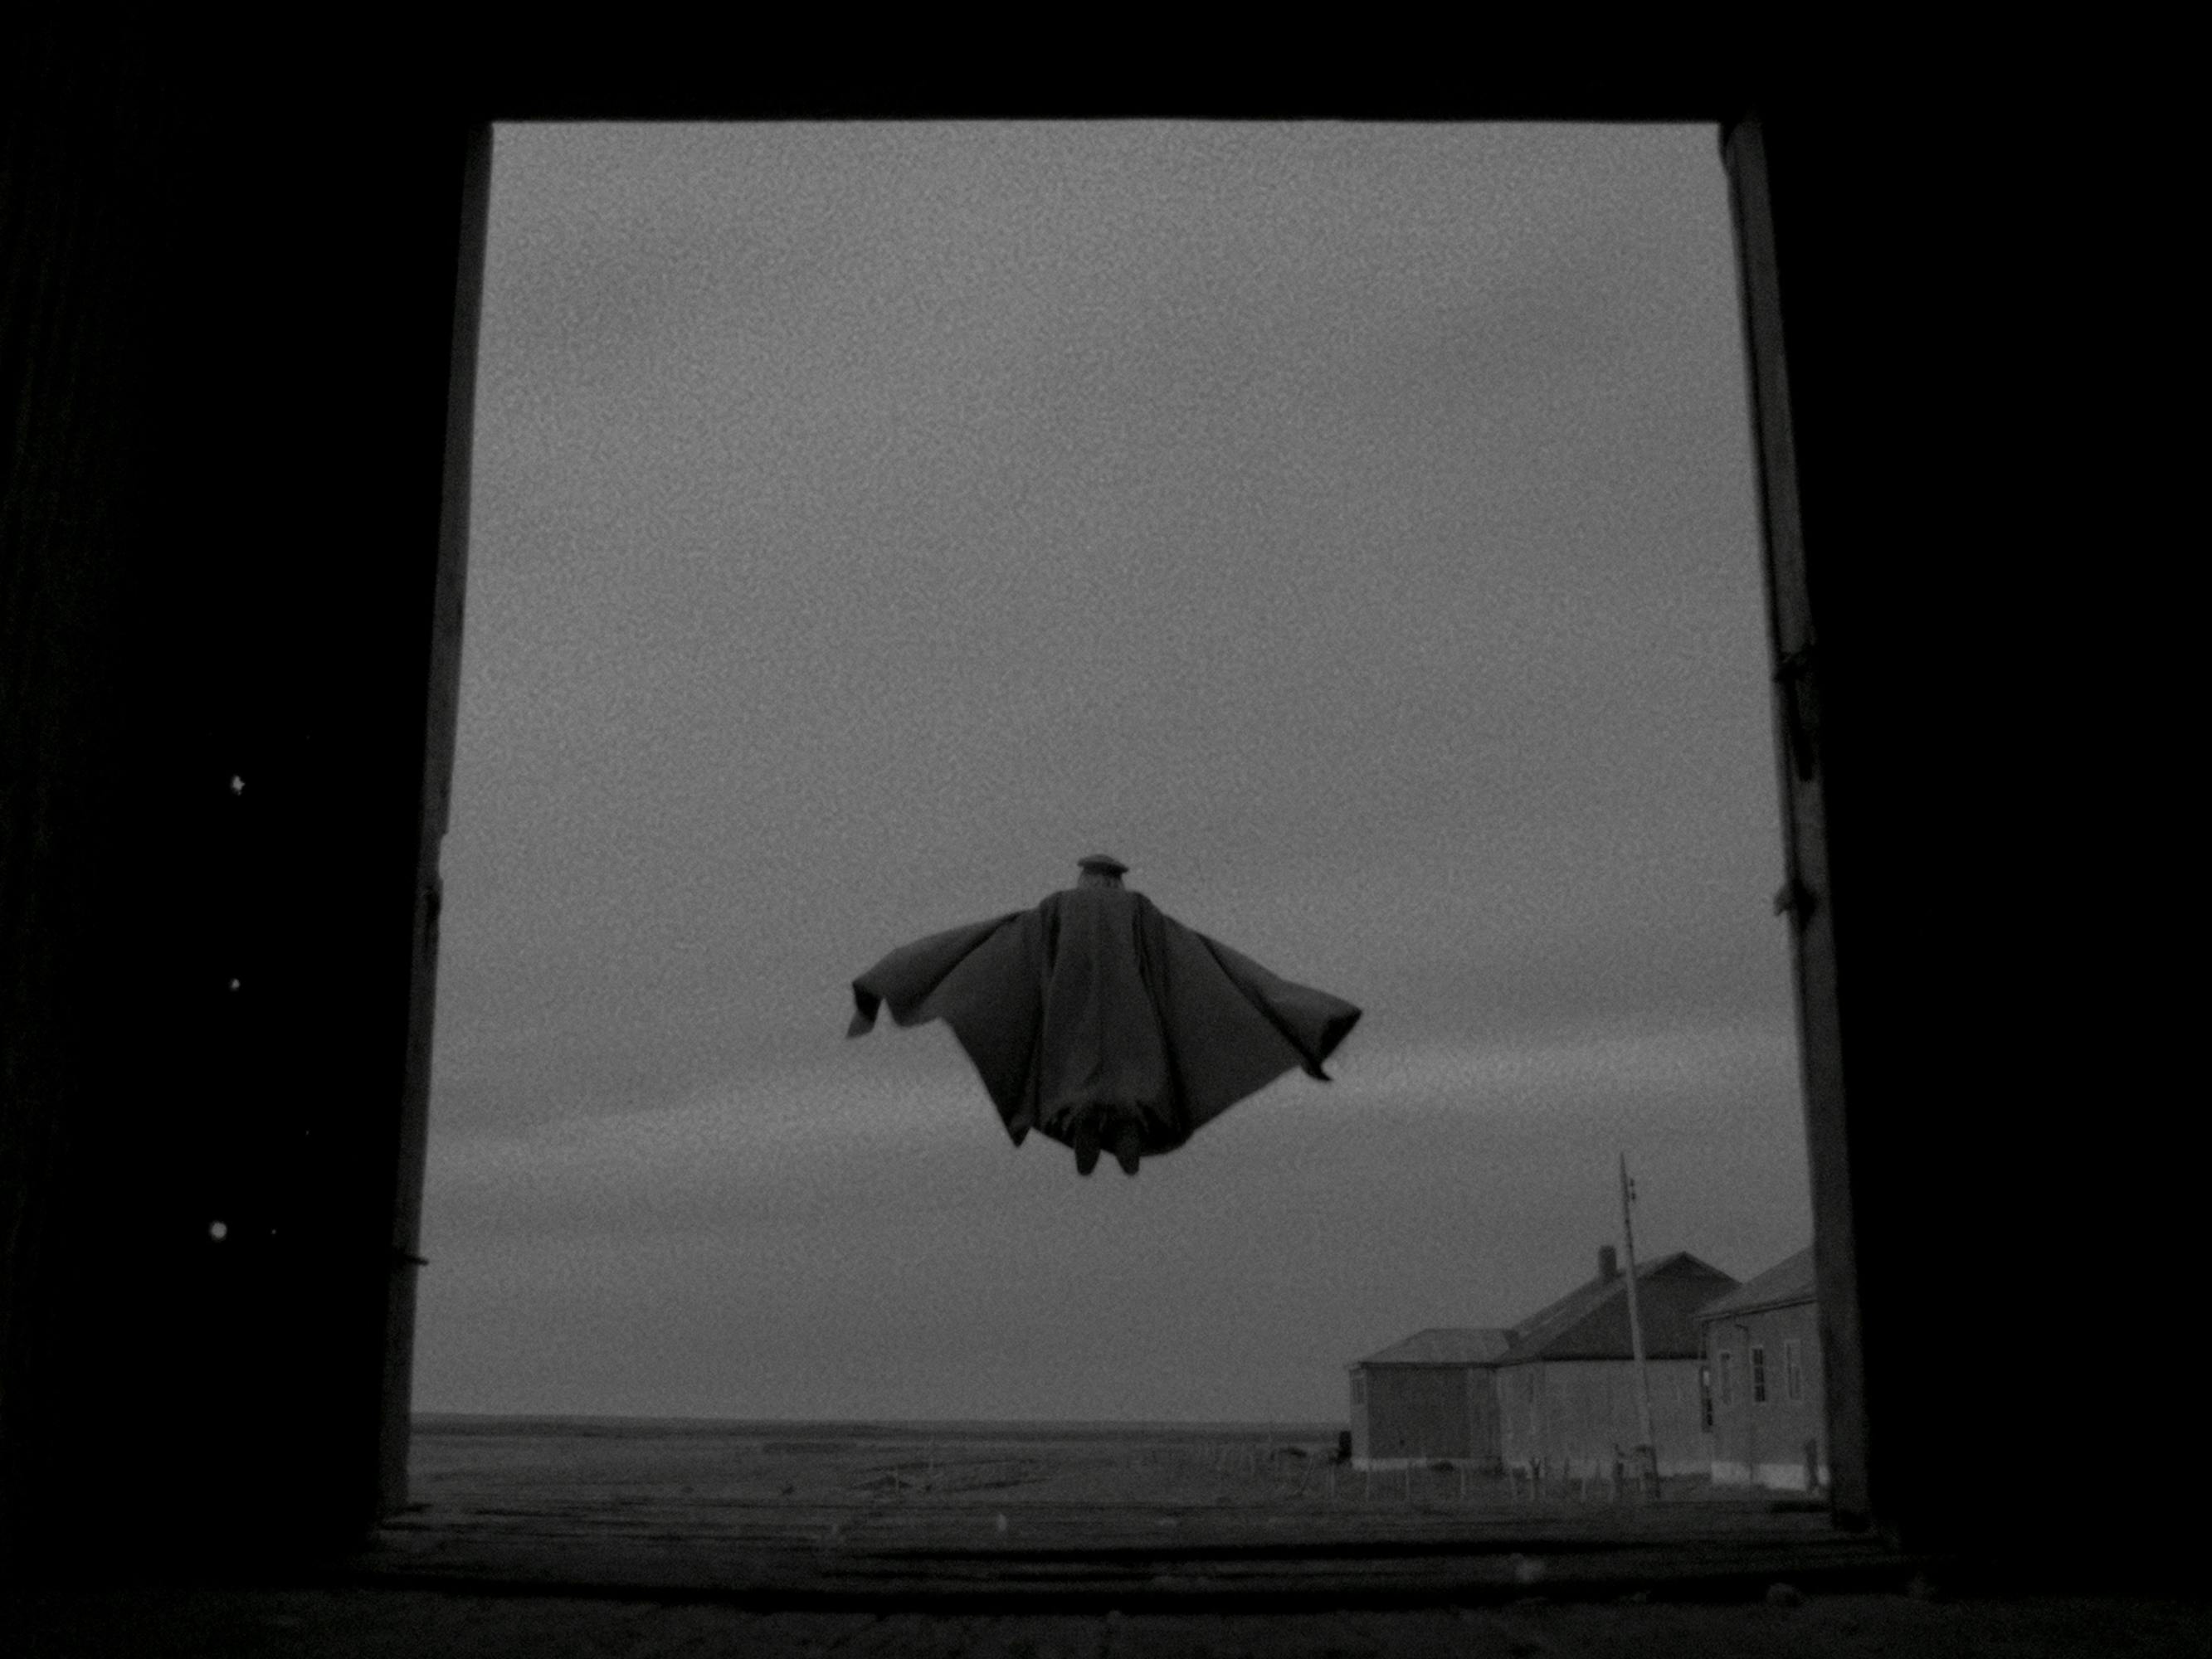 Augusto Pinochet (Jamie Vadell) wears a bat-like cape and flies into the gray sky.